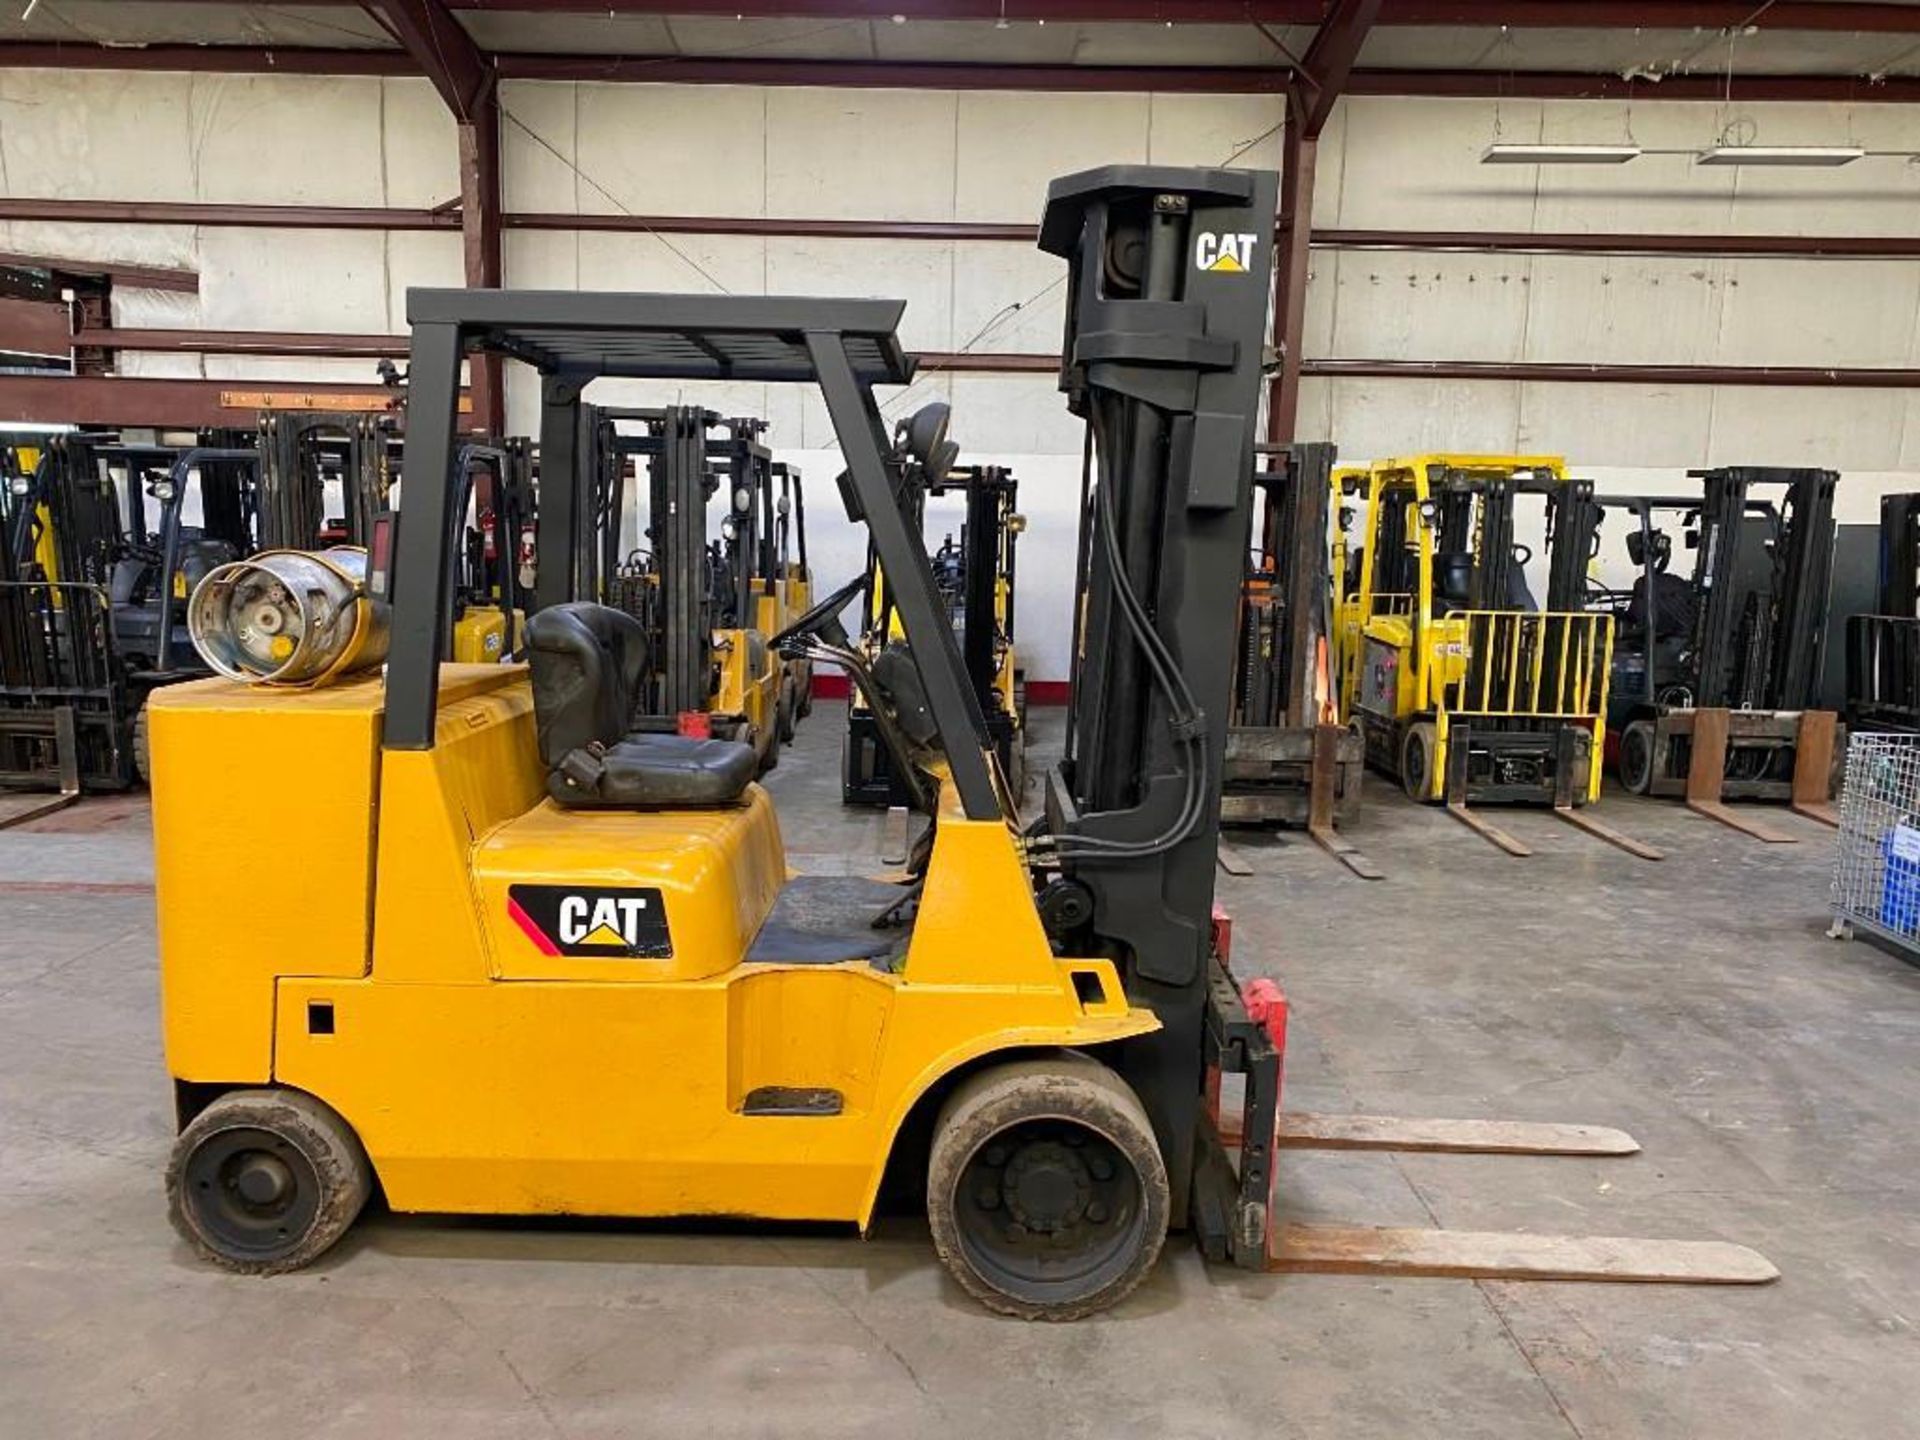 Caterpillar 11,000-LB. Forklift, Model GC55K-LP-STR, S/N AT88A20243, LPG, Cushion Tires, 3-Stage Mas - Image 3 of 5